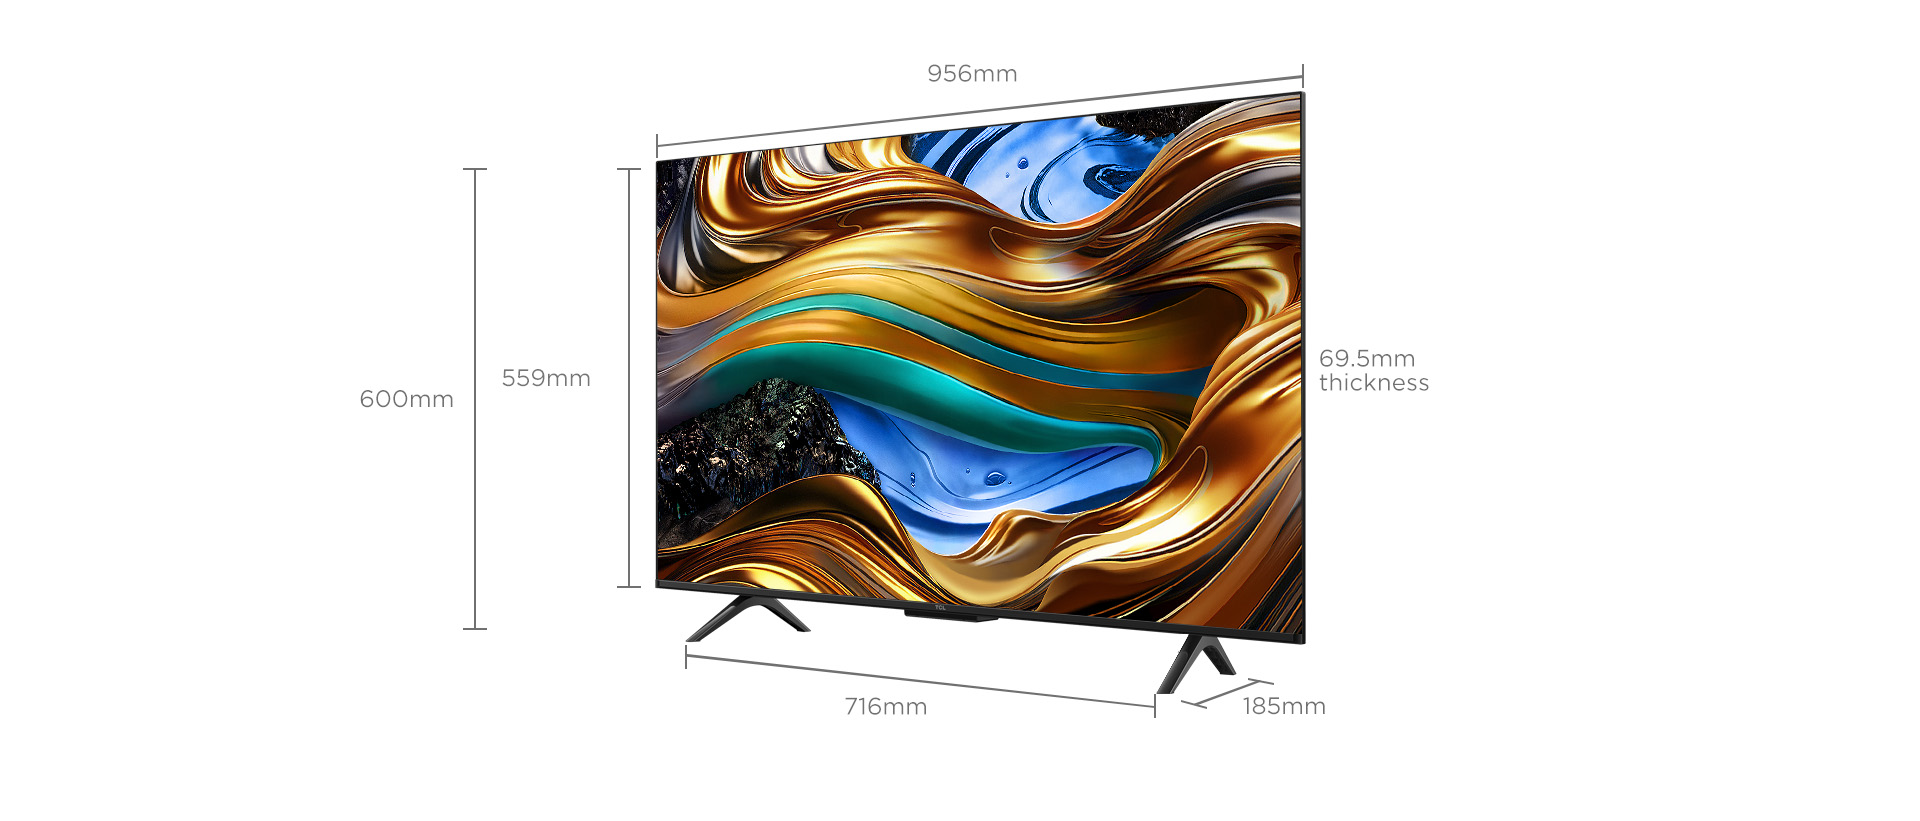 43 inch TCL P755 Smart TV